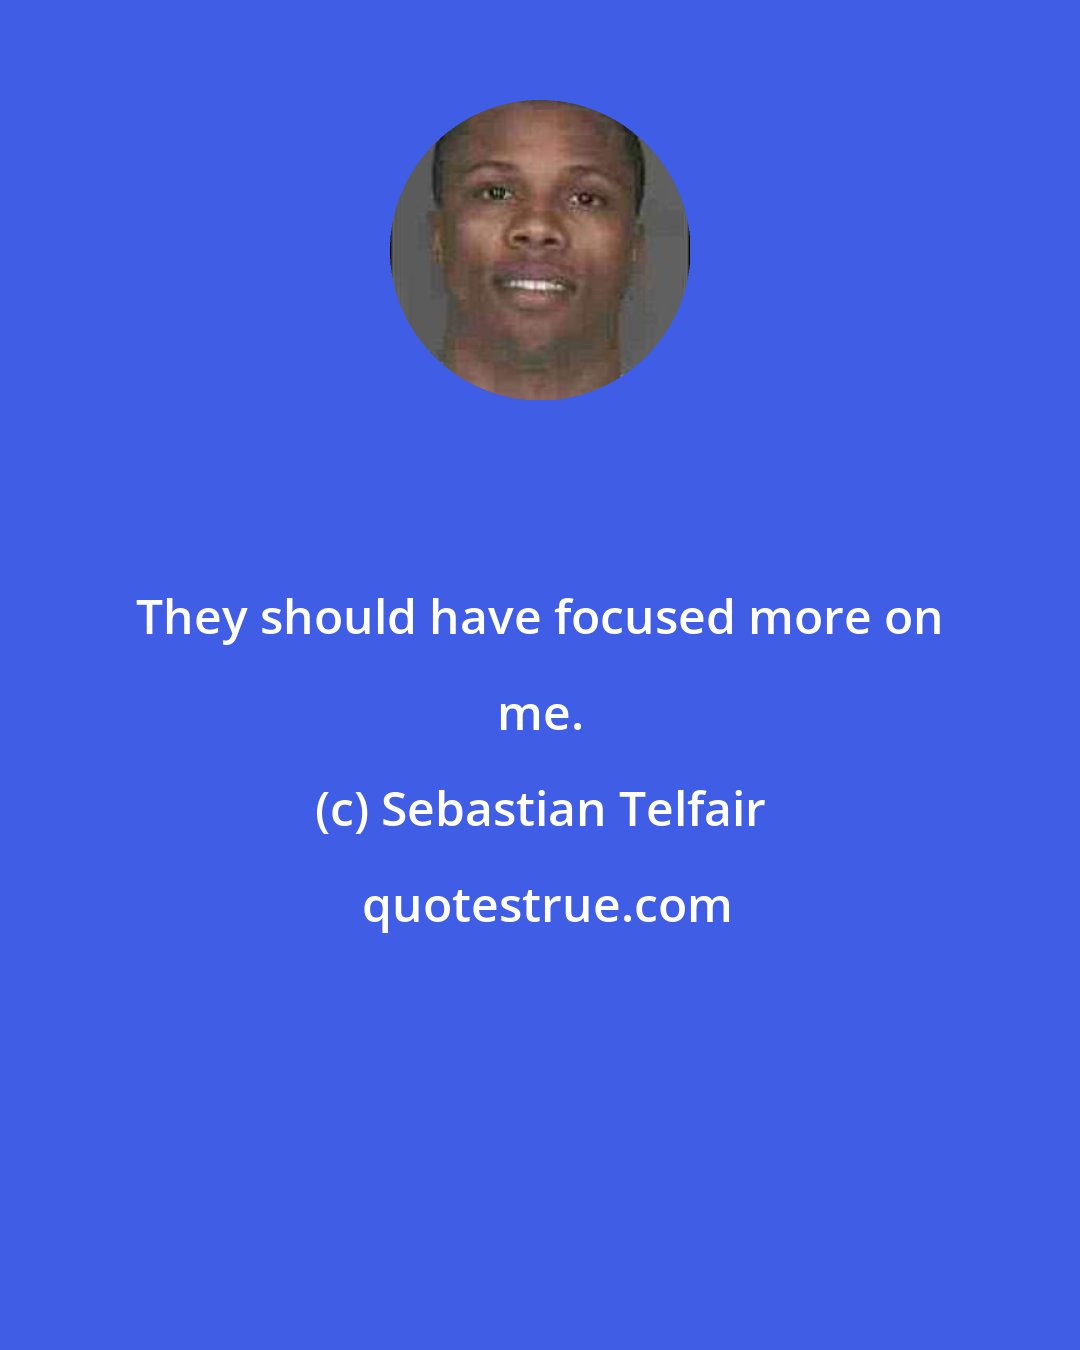 Sebastian Telfair: They should have focused more on me.